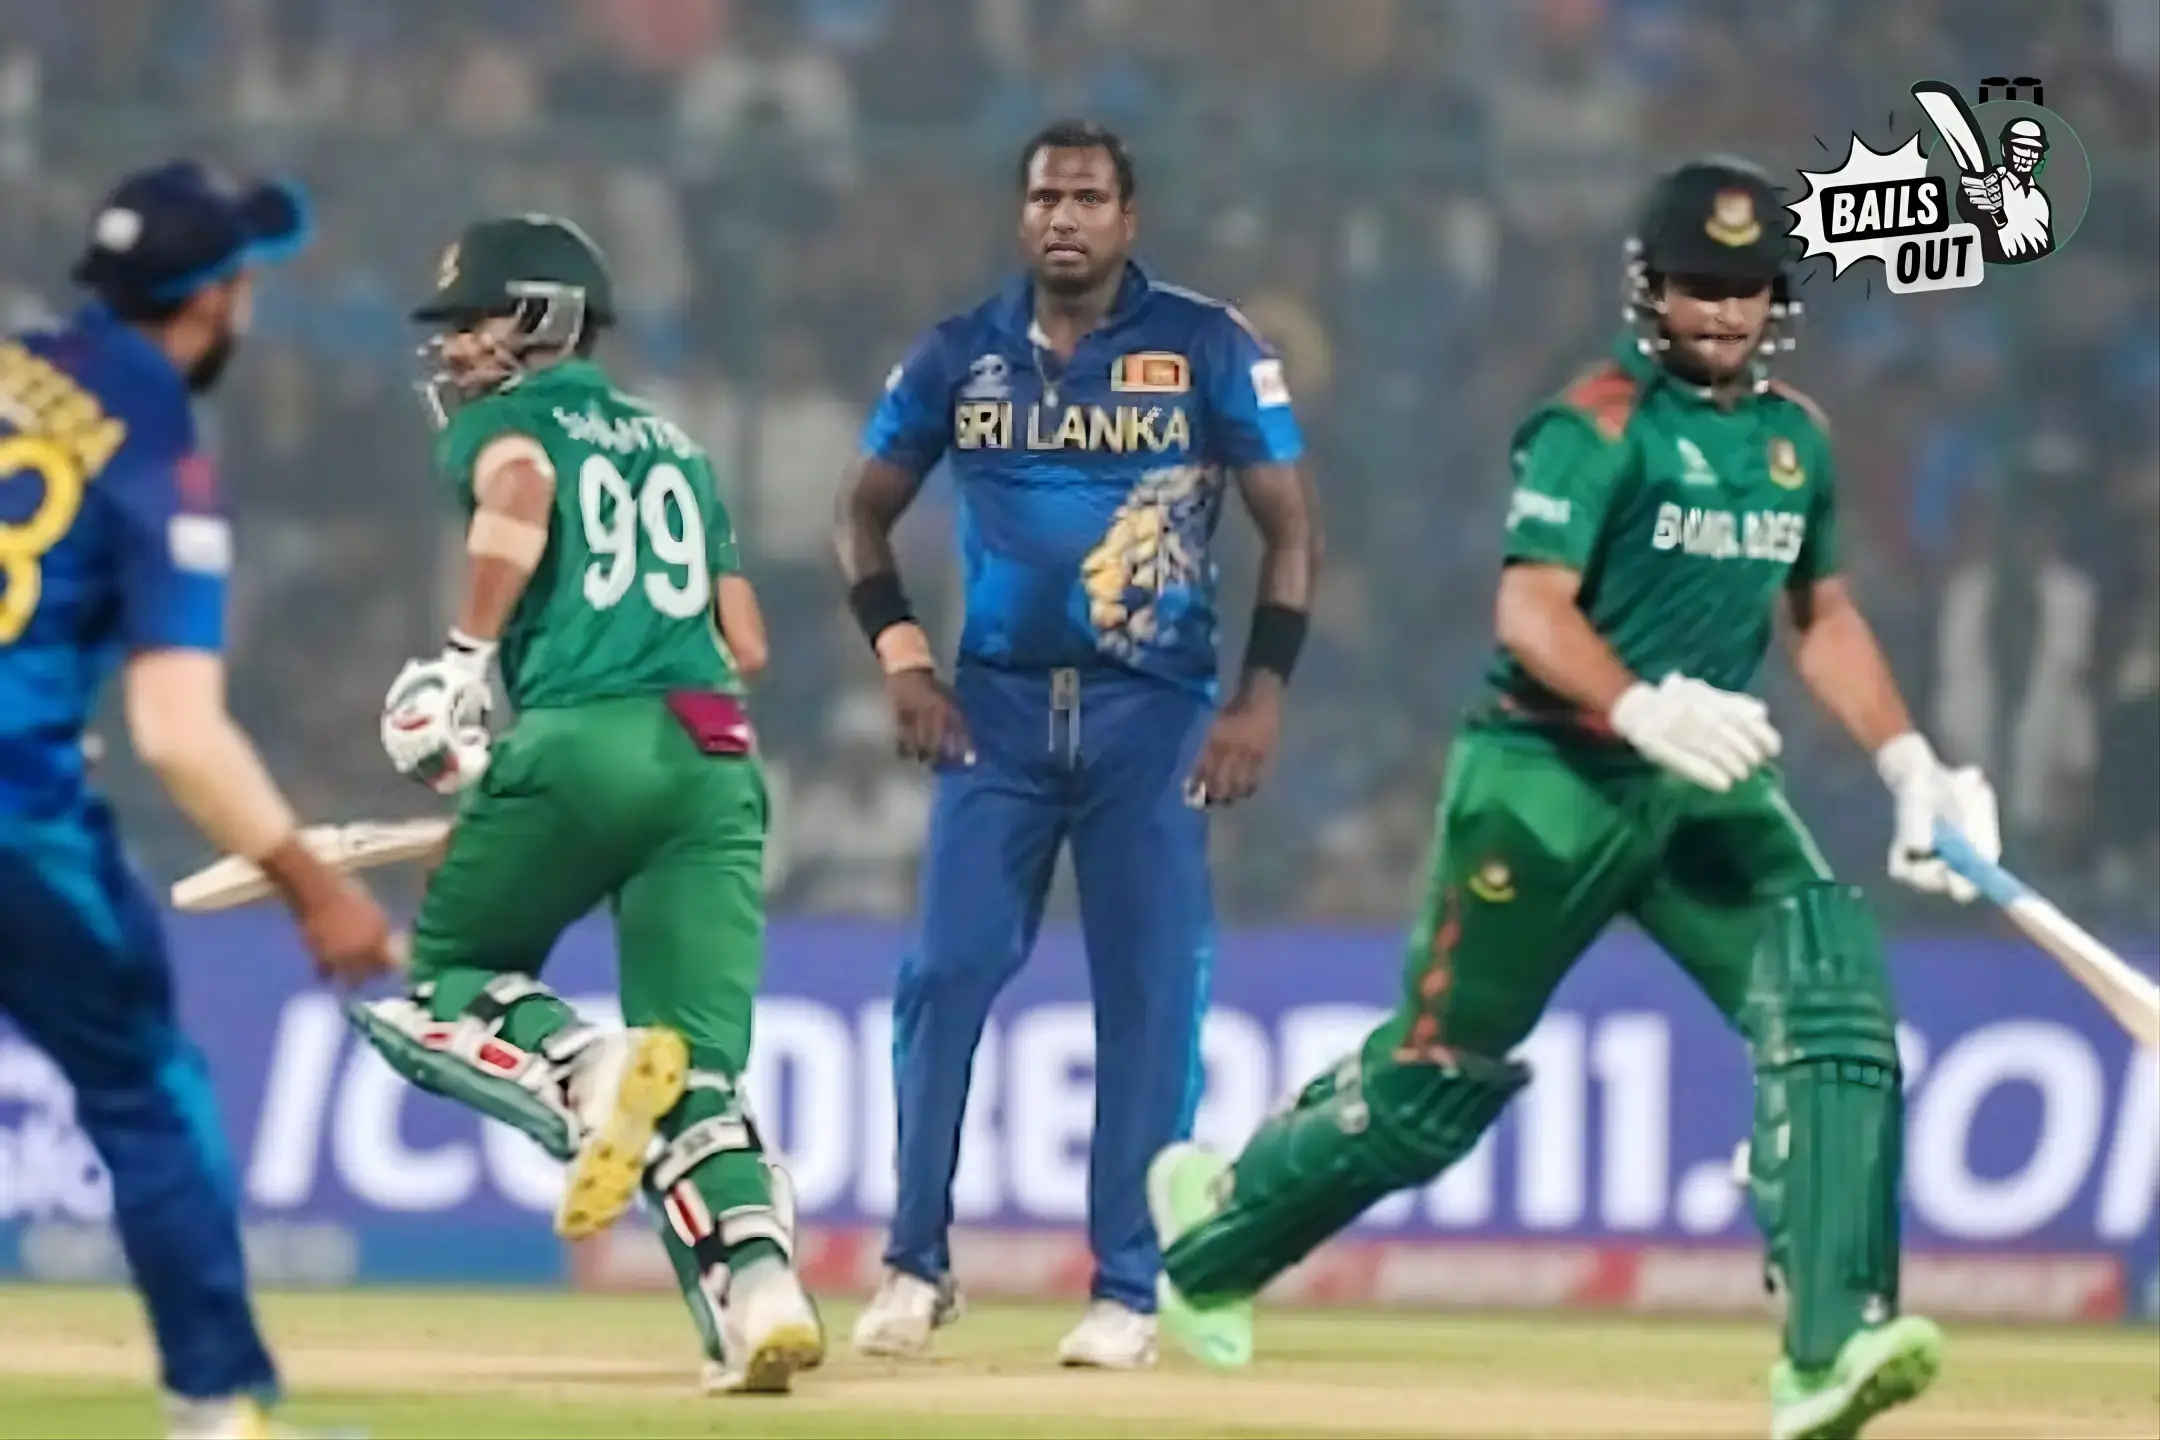 Bangladesh won the 38th match of the World Cup